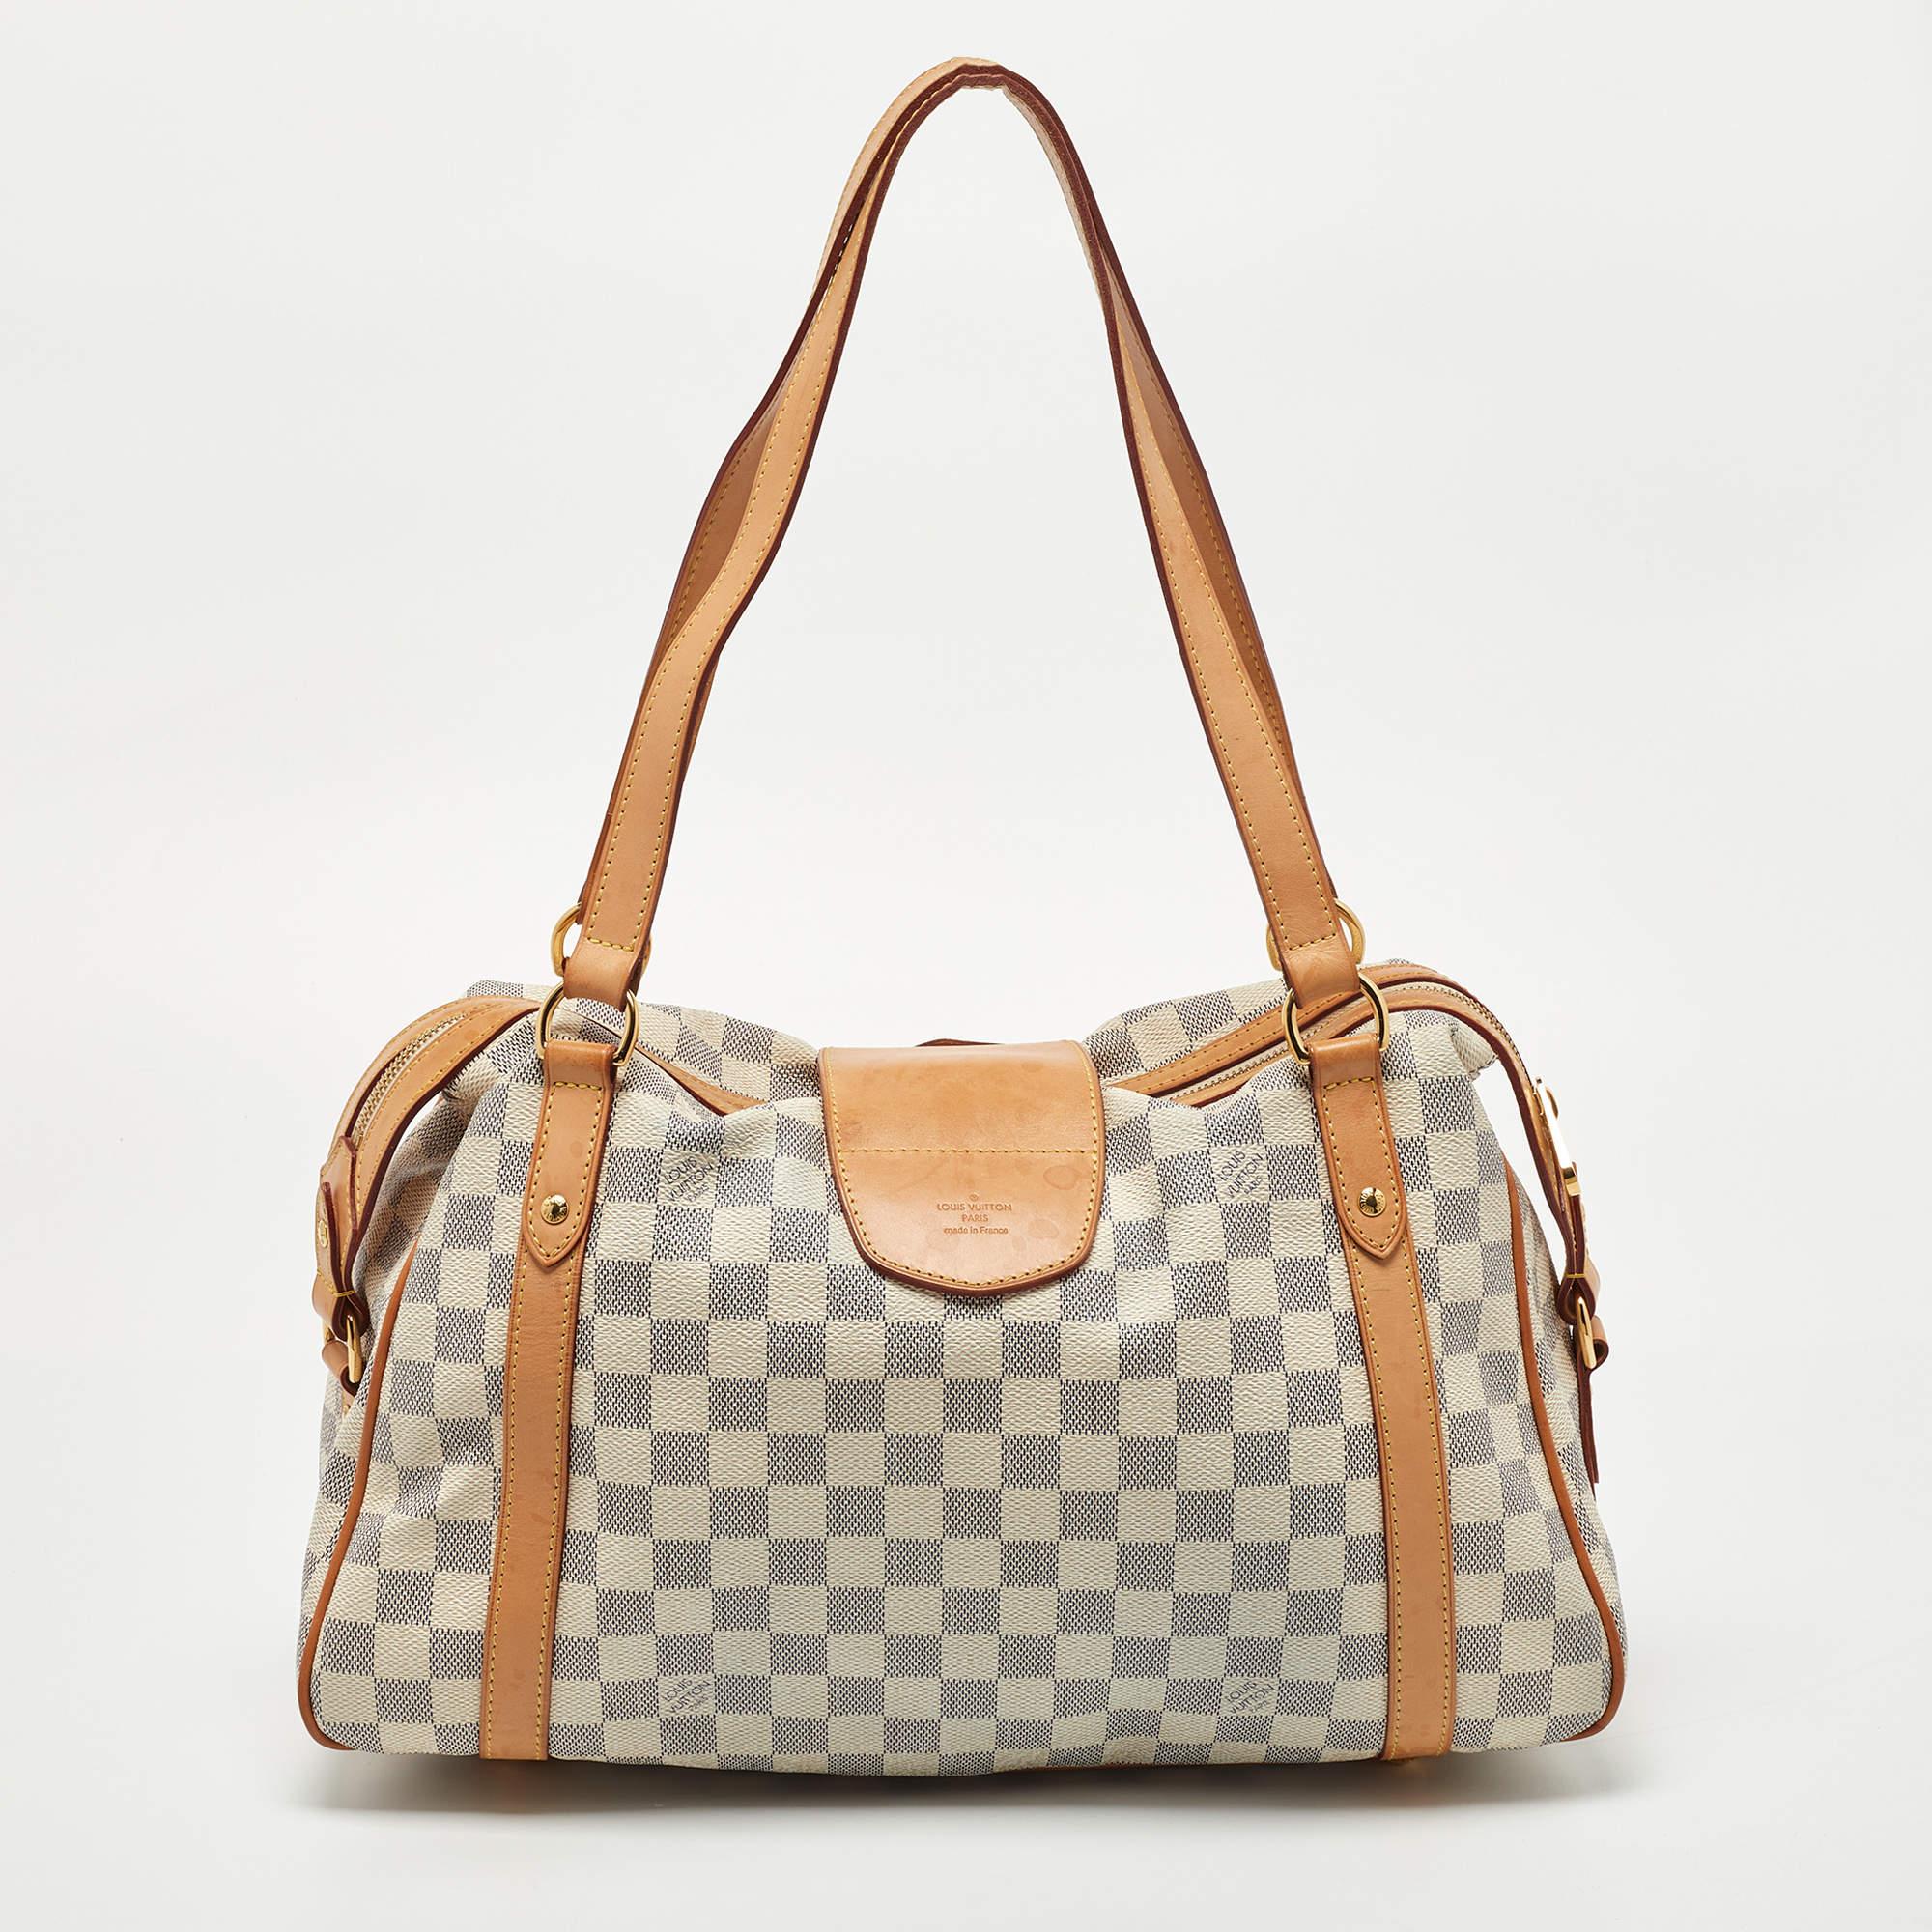 This Stresa bag by Louis Vuitton will add ease to your daily routine. Crafted from Damier Azur canvas with leather trims, it features a top zipper closure, dual handles, and polished gold-tone hardware. The canvas-lined interior has ample space for